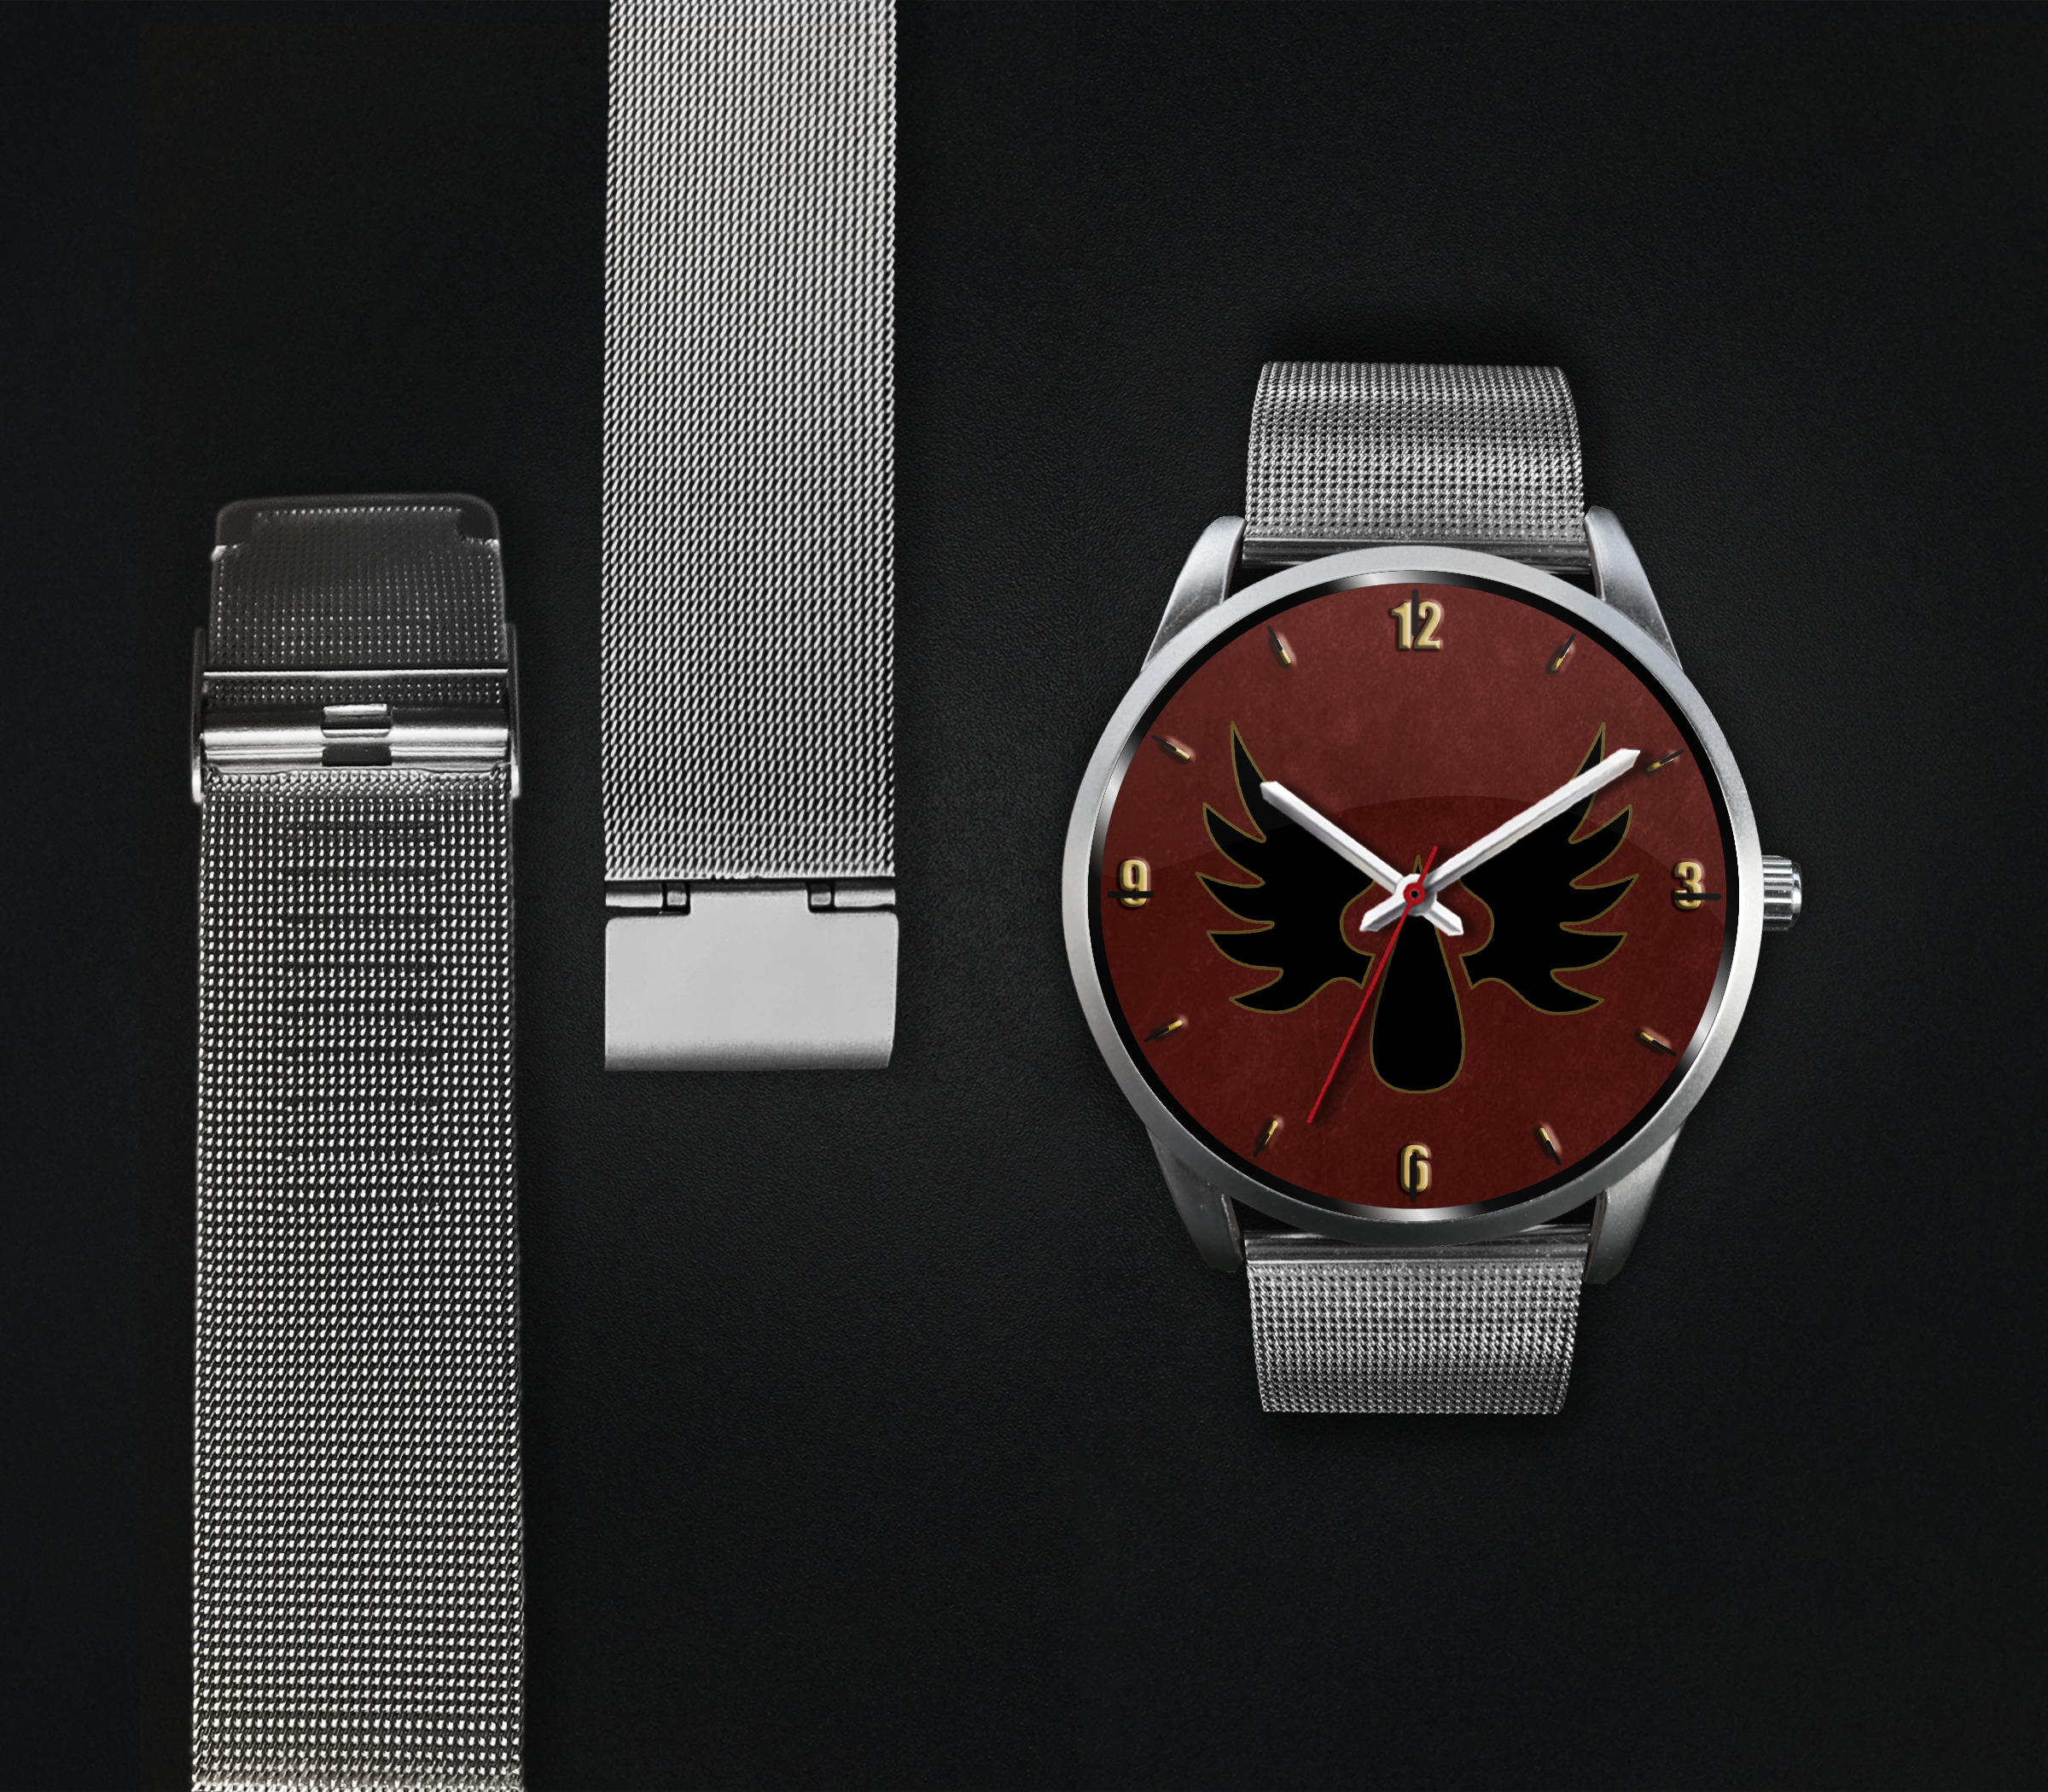 Blood Angels | Watch | Gift Idea | WH 40K